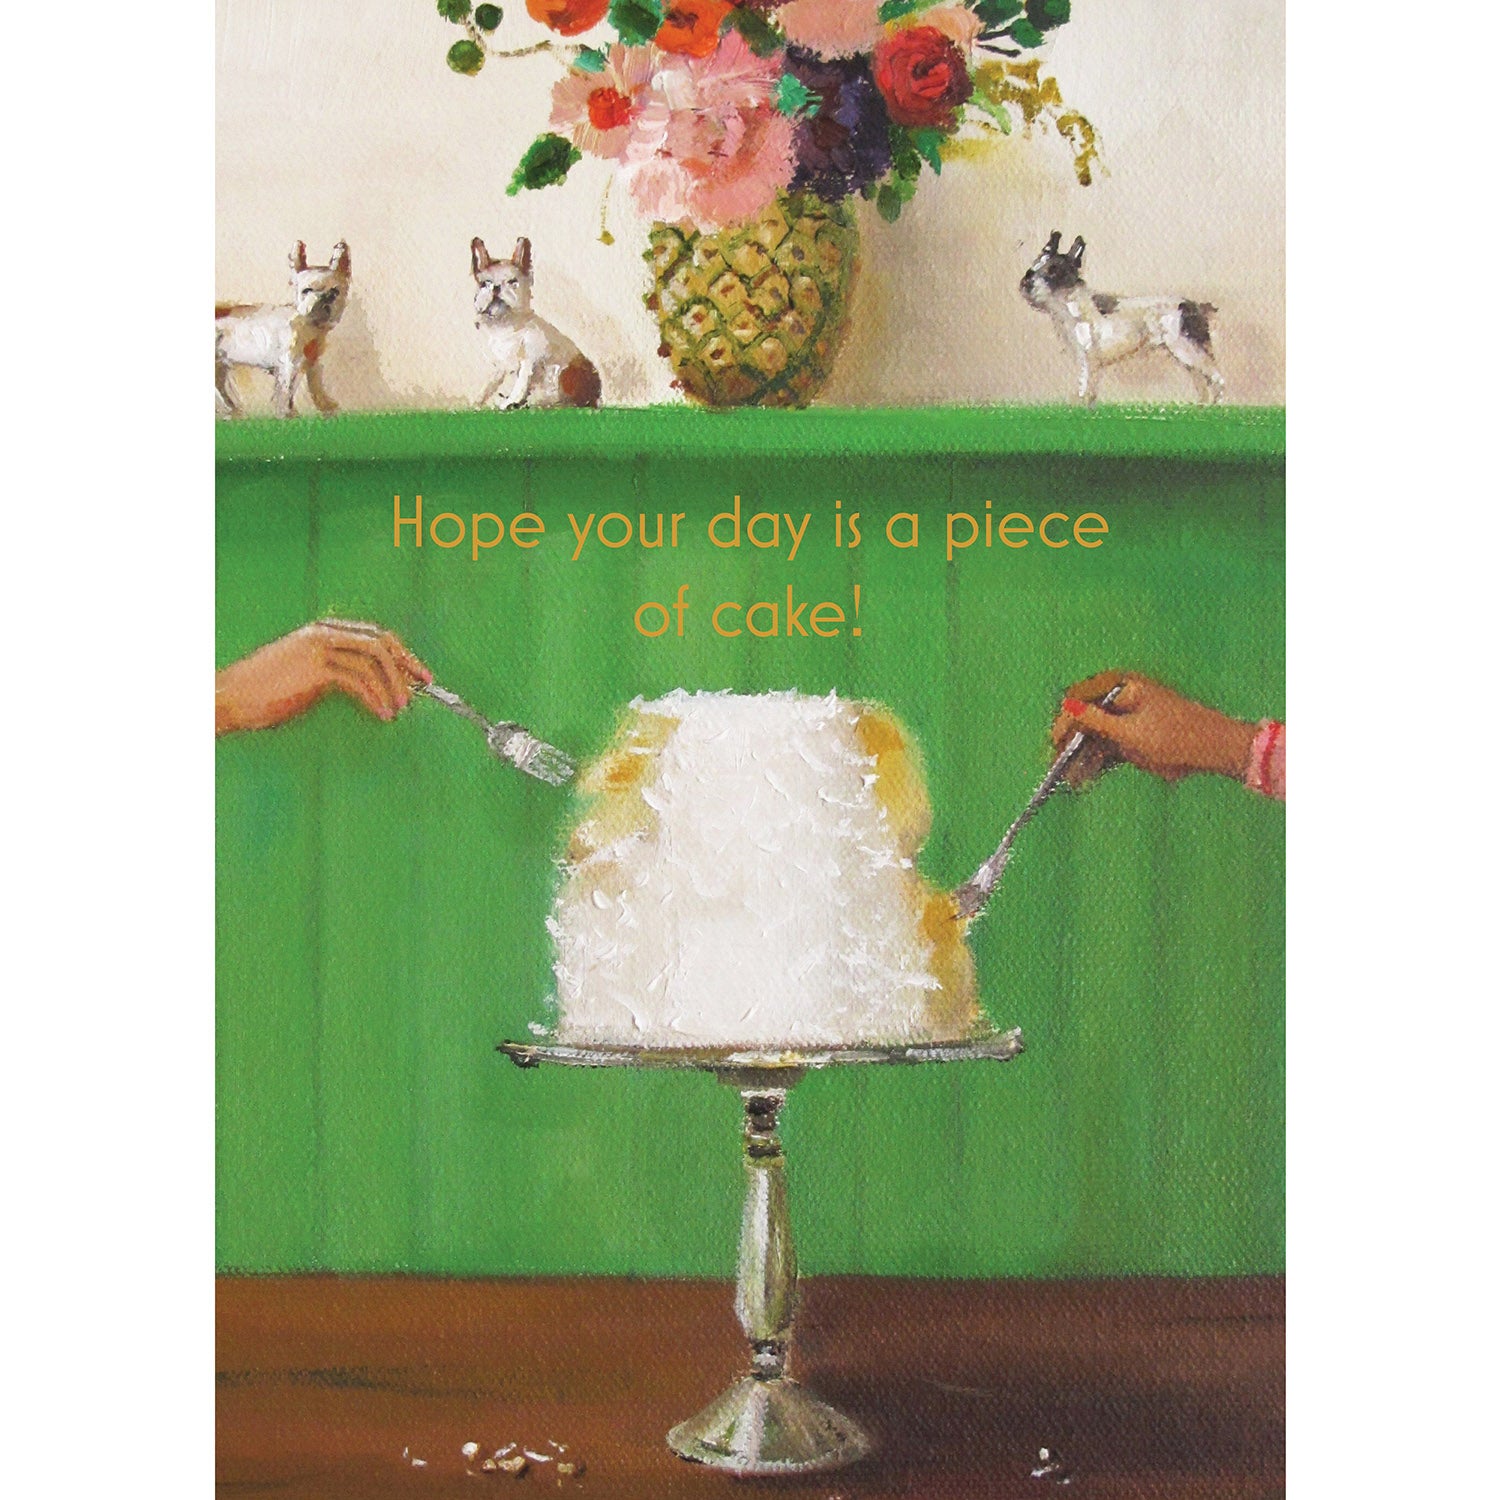 A painterly illustration of a white cake on a silver stand against a bright green background, with two hands reaching in with forks, and a vase fill of flowers in the background. The message &quot;Hope your day is a piece of cake!&quot; is printed in gold above the cake.